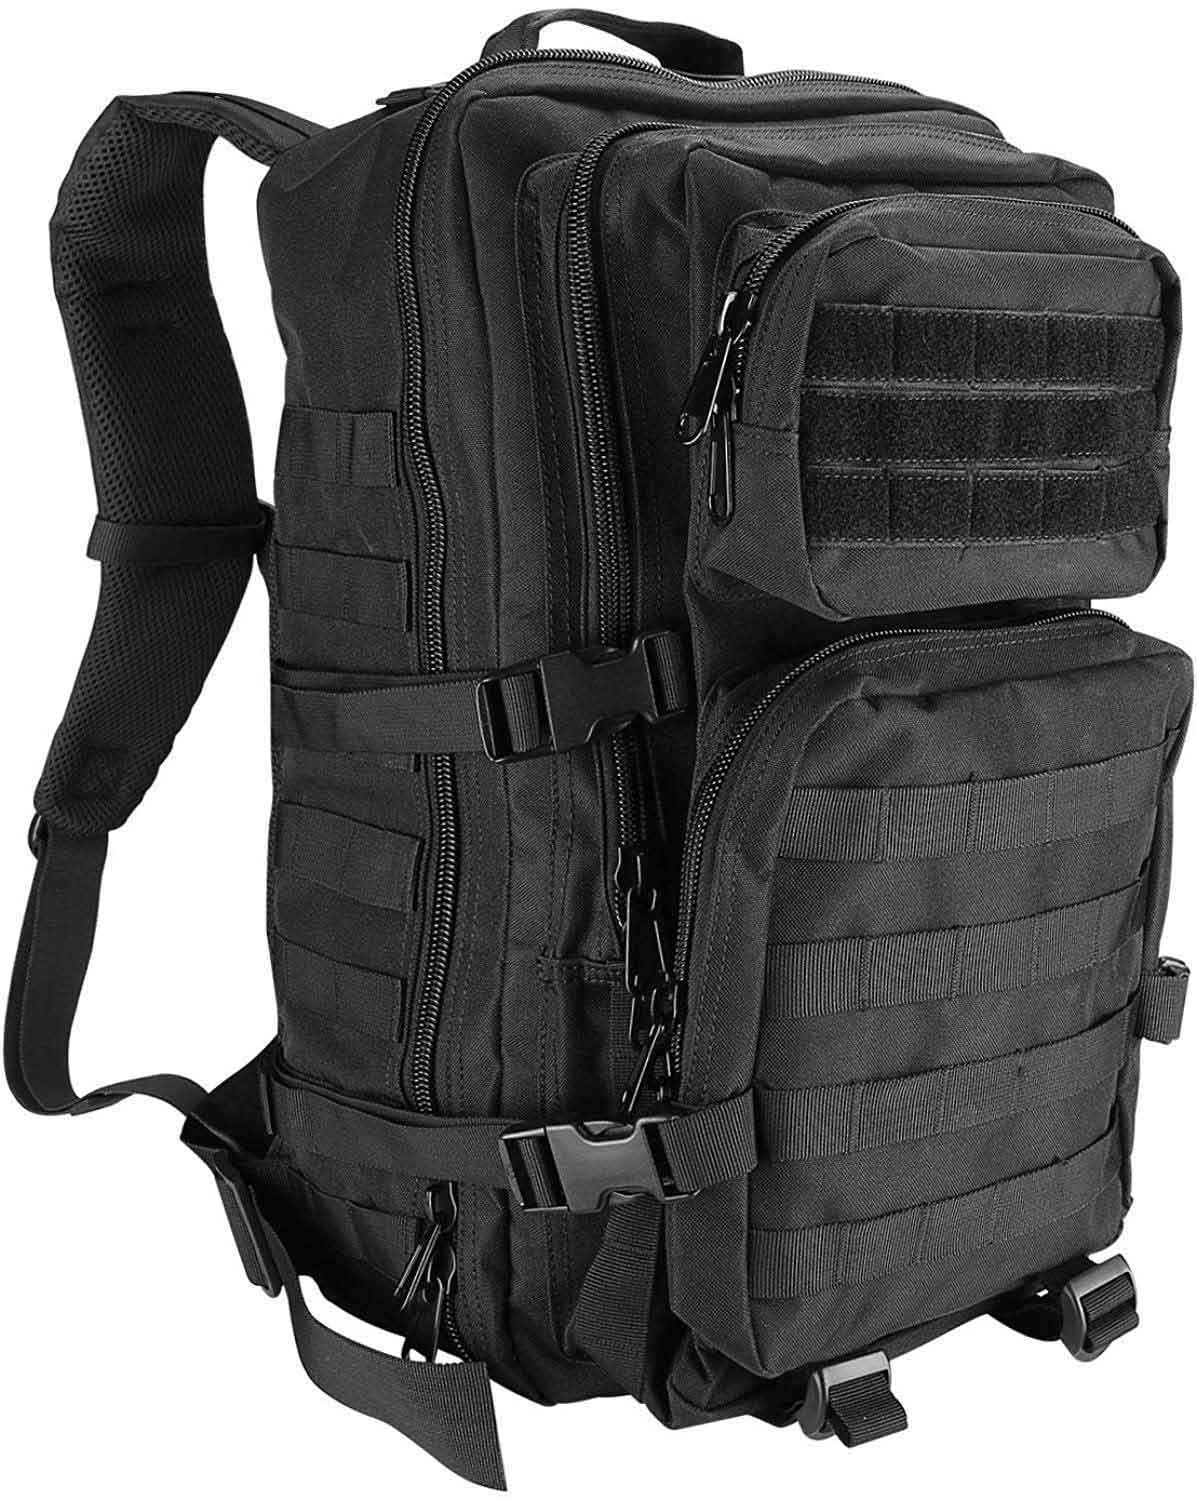  | tactical backpack brands |  tactical backpack amazon |  tactical backpack made in usa |  tactical backpack for guns |  tactical backpack accessories |  tactical backpack near me |  tactical backpack patches |  tactical backpack small |  tactical backpack academy |  tactical backpack ar pistol |  tactical backpack armor |  tactical backpack afterpay |  tactical backpack australia |  tactical backpack army |  packing a tactical backpack |  high and tactical backpack |  what is a tactical backpack |  how to clean a tactical backpack |  how to make a tactical backpack |  what is the best tactical backpack |  what should be in a tactical go bag |  tactical backpack black |  tactical backpack bulletproof |  tactical backpack body armor |  tactical backpack baby |  tactical backpack big 5 |  tactical backpack bass pro |  tactical backpack best |  b-tactical |  tactical backpack cooler |  tactical backpack companies |  tactical backpack coyote brown |  tactical backpack cheap |  tactical backpack camo |  tactical backpack clips |  tactical backpack carry on |  tactical backpack condor |  s.o.c tactical backpack |  tactical backpack dayz |  tactical backpack diaper bag |  tactical backpack drago |  tactical backpack definition |  tactical backpack dubai |  tactical backpack dunham's |  tactical backpack desert |  tactical backpack discount | 